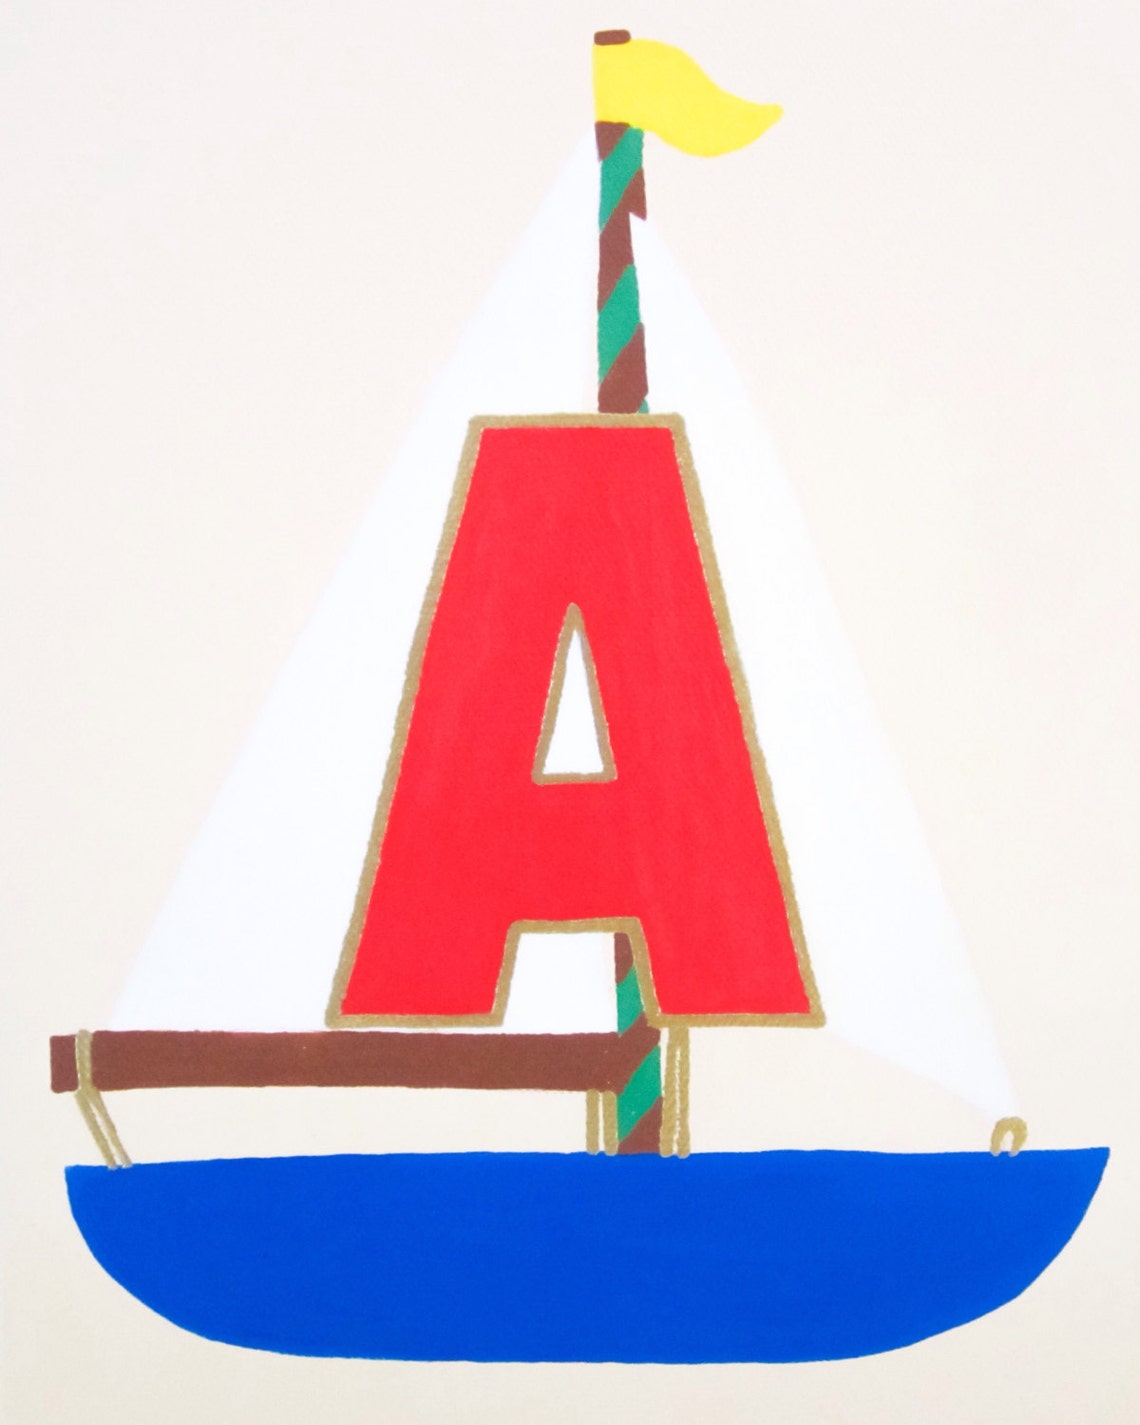 sailboat 6 letters